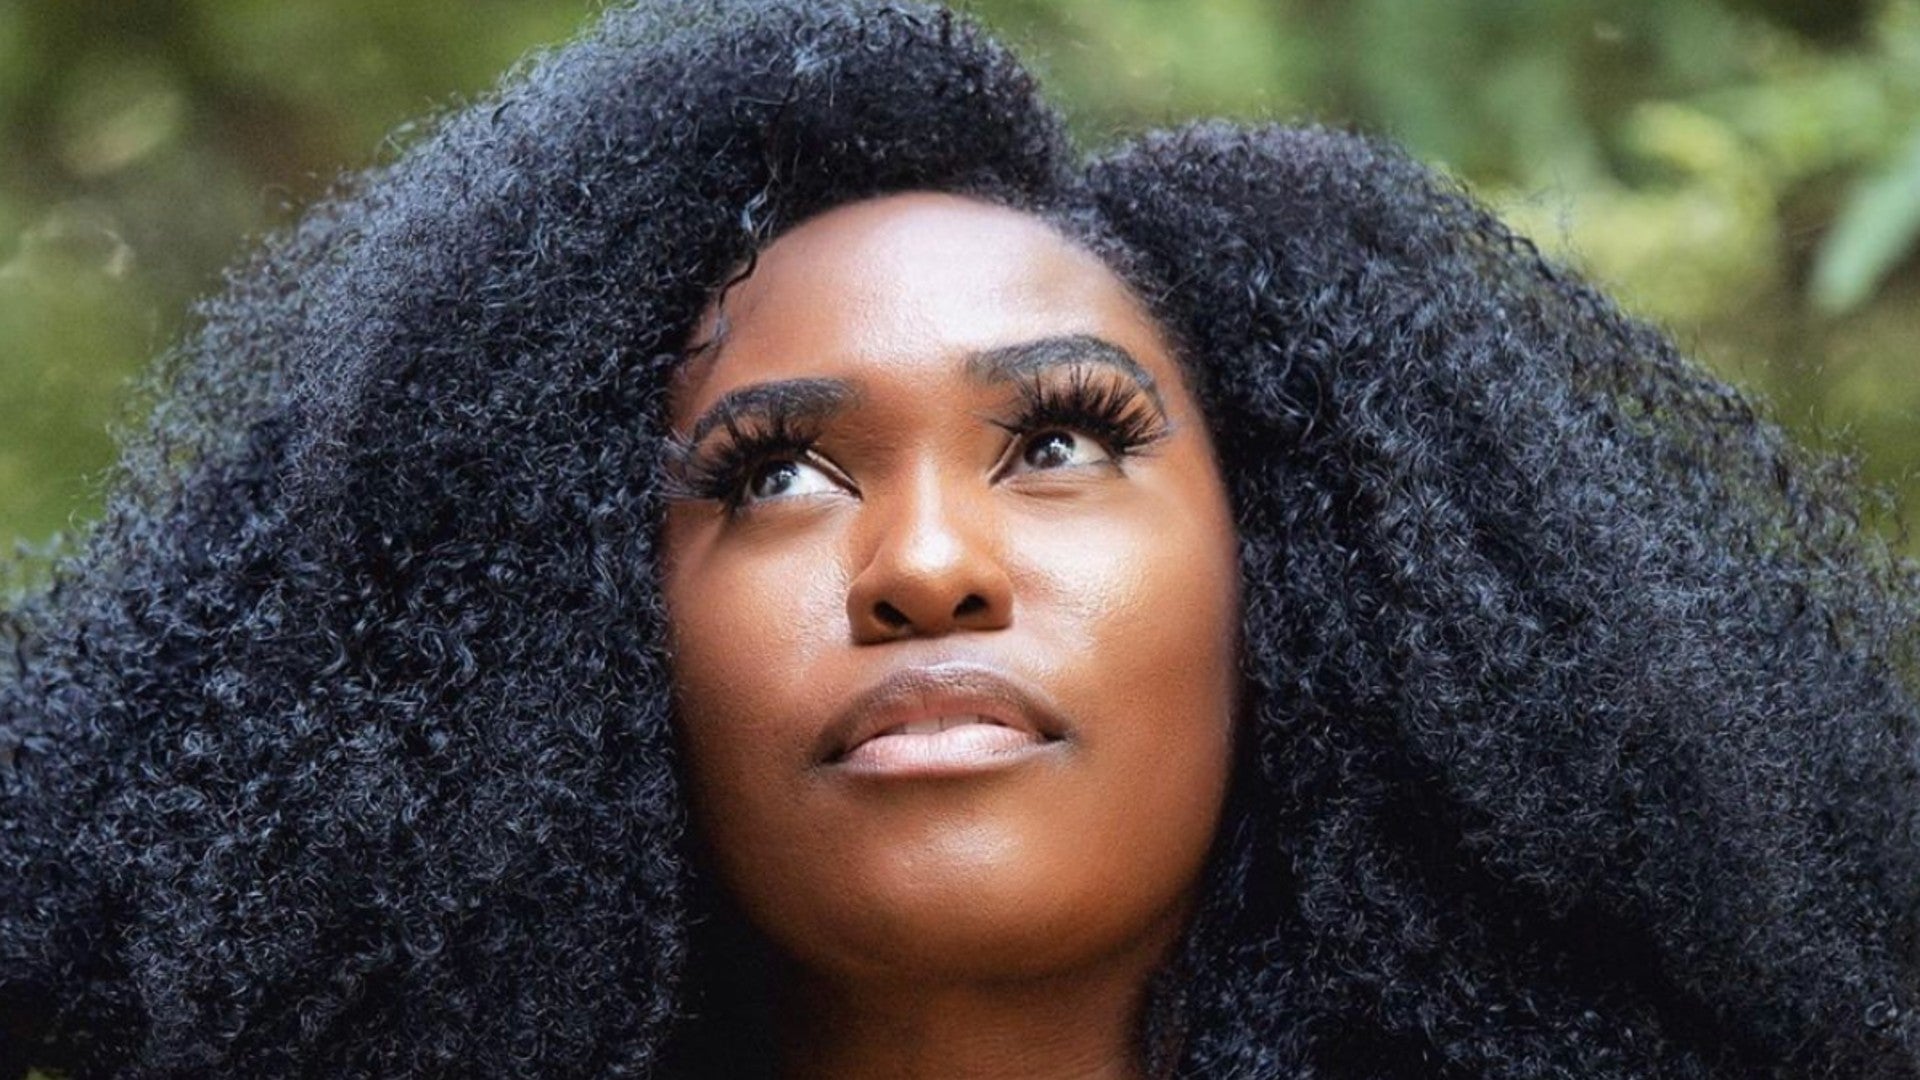 The Growth Guru Says This Is The Hardest Part Of Growing Your Natural Hair